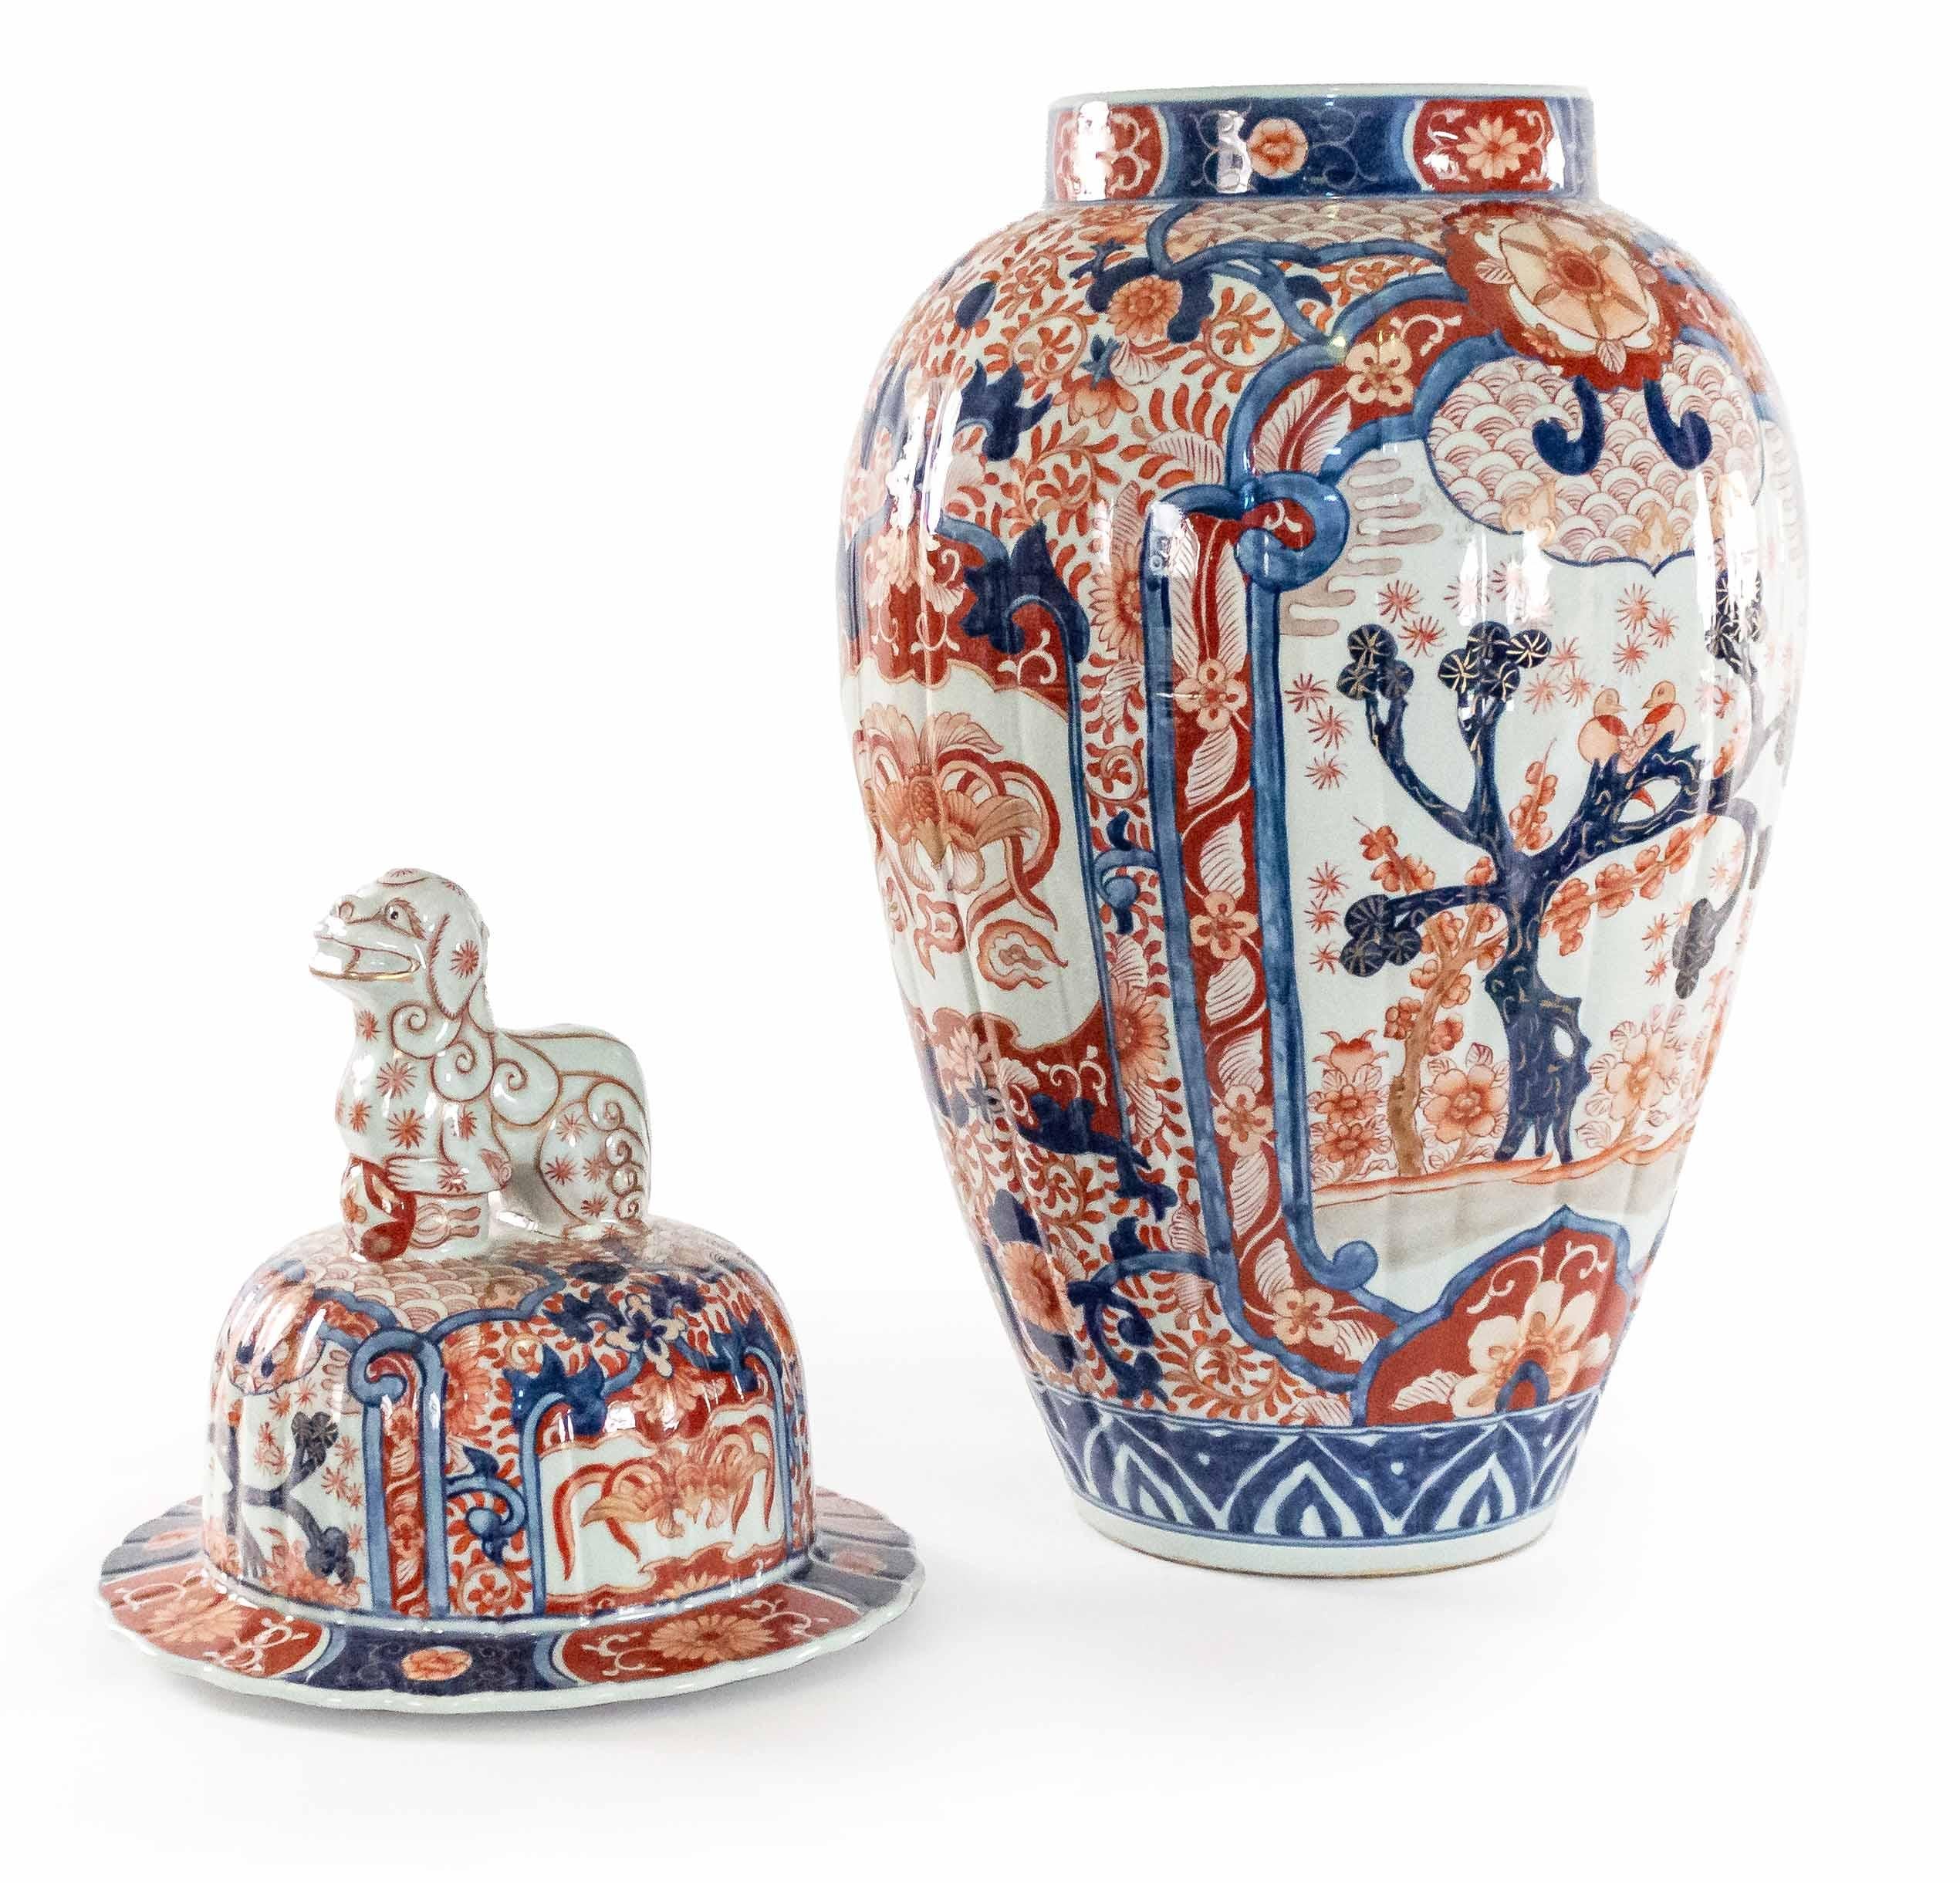 Pair of Asian Japanese large imari rose porcelain covered baluster-shaped vases (temple jars) with lids having foo dog finials (19/20th Century).
 